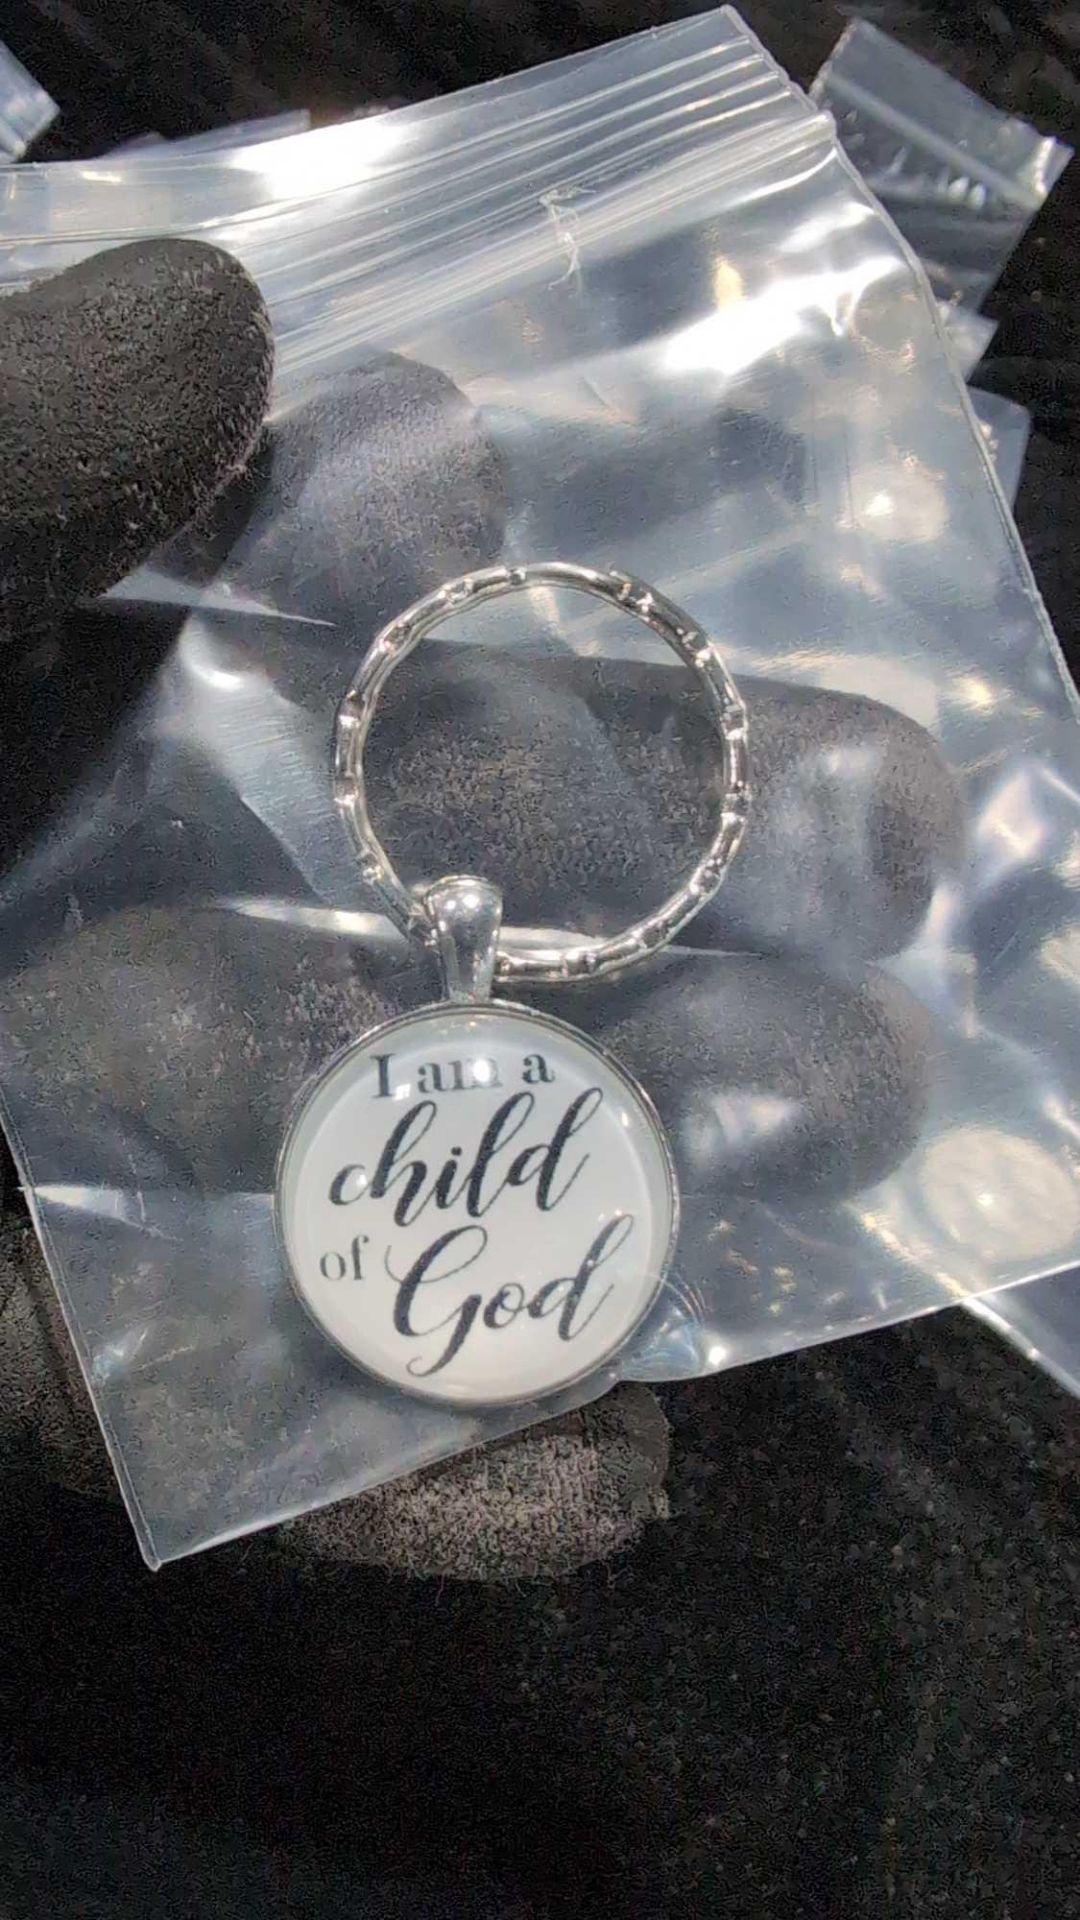 "I am Child of God" Keychains (approx 50) - Image 4 of 4